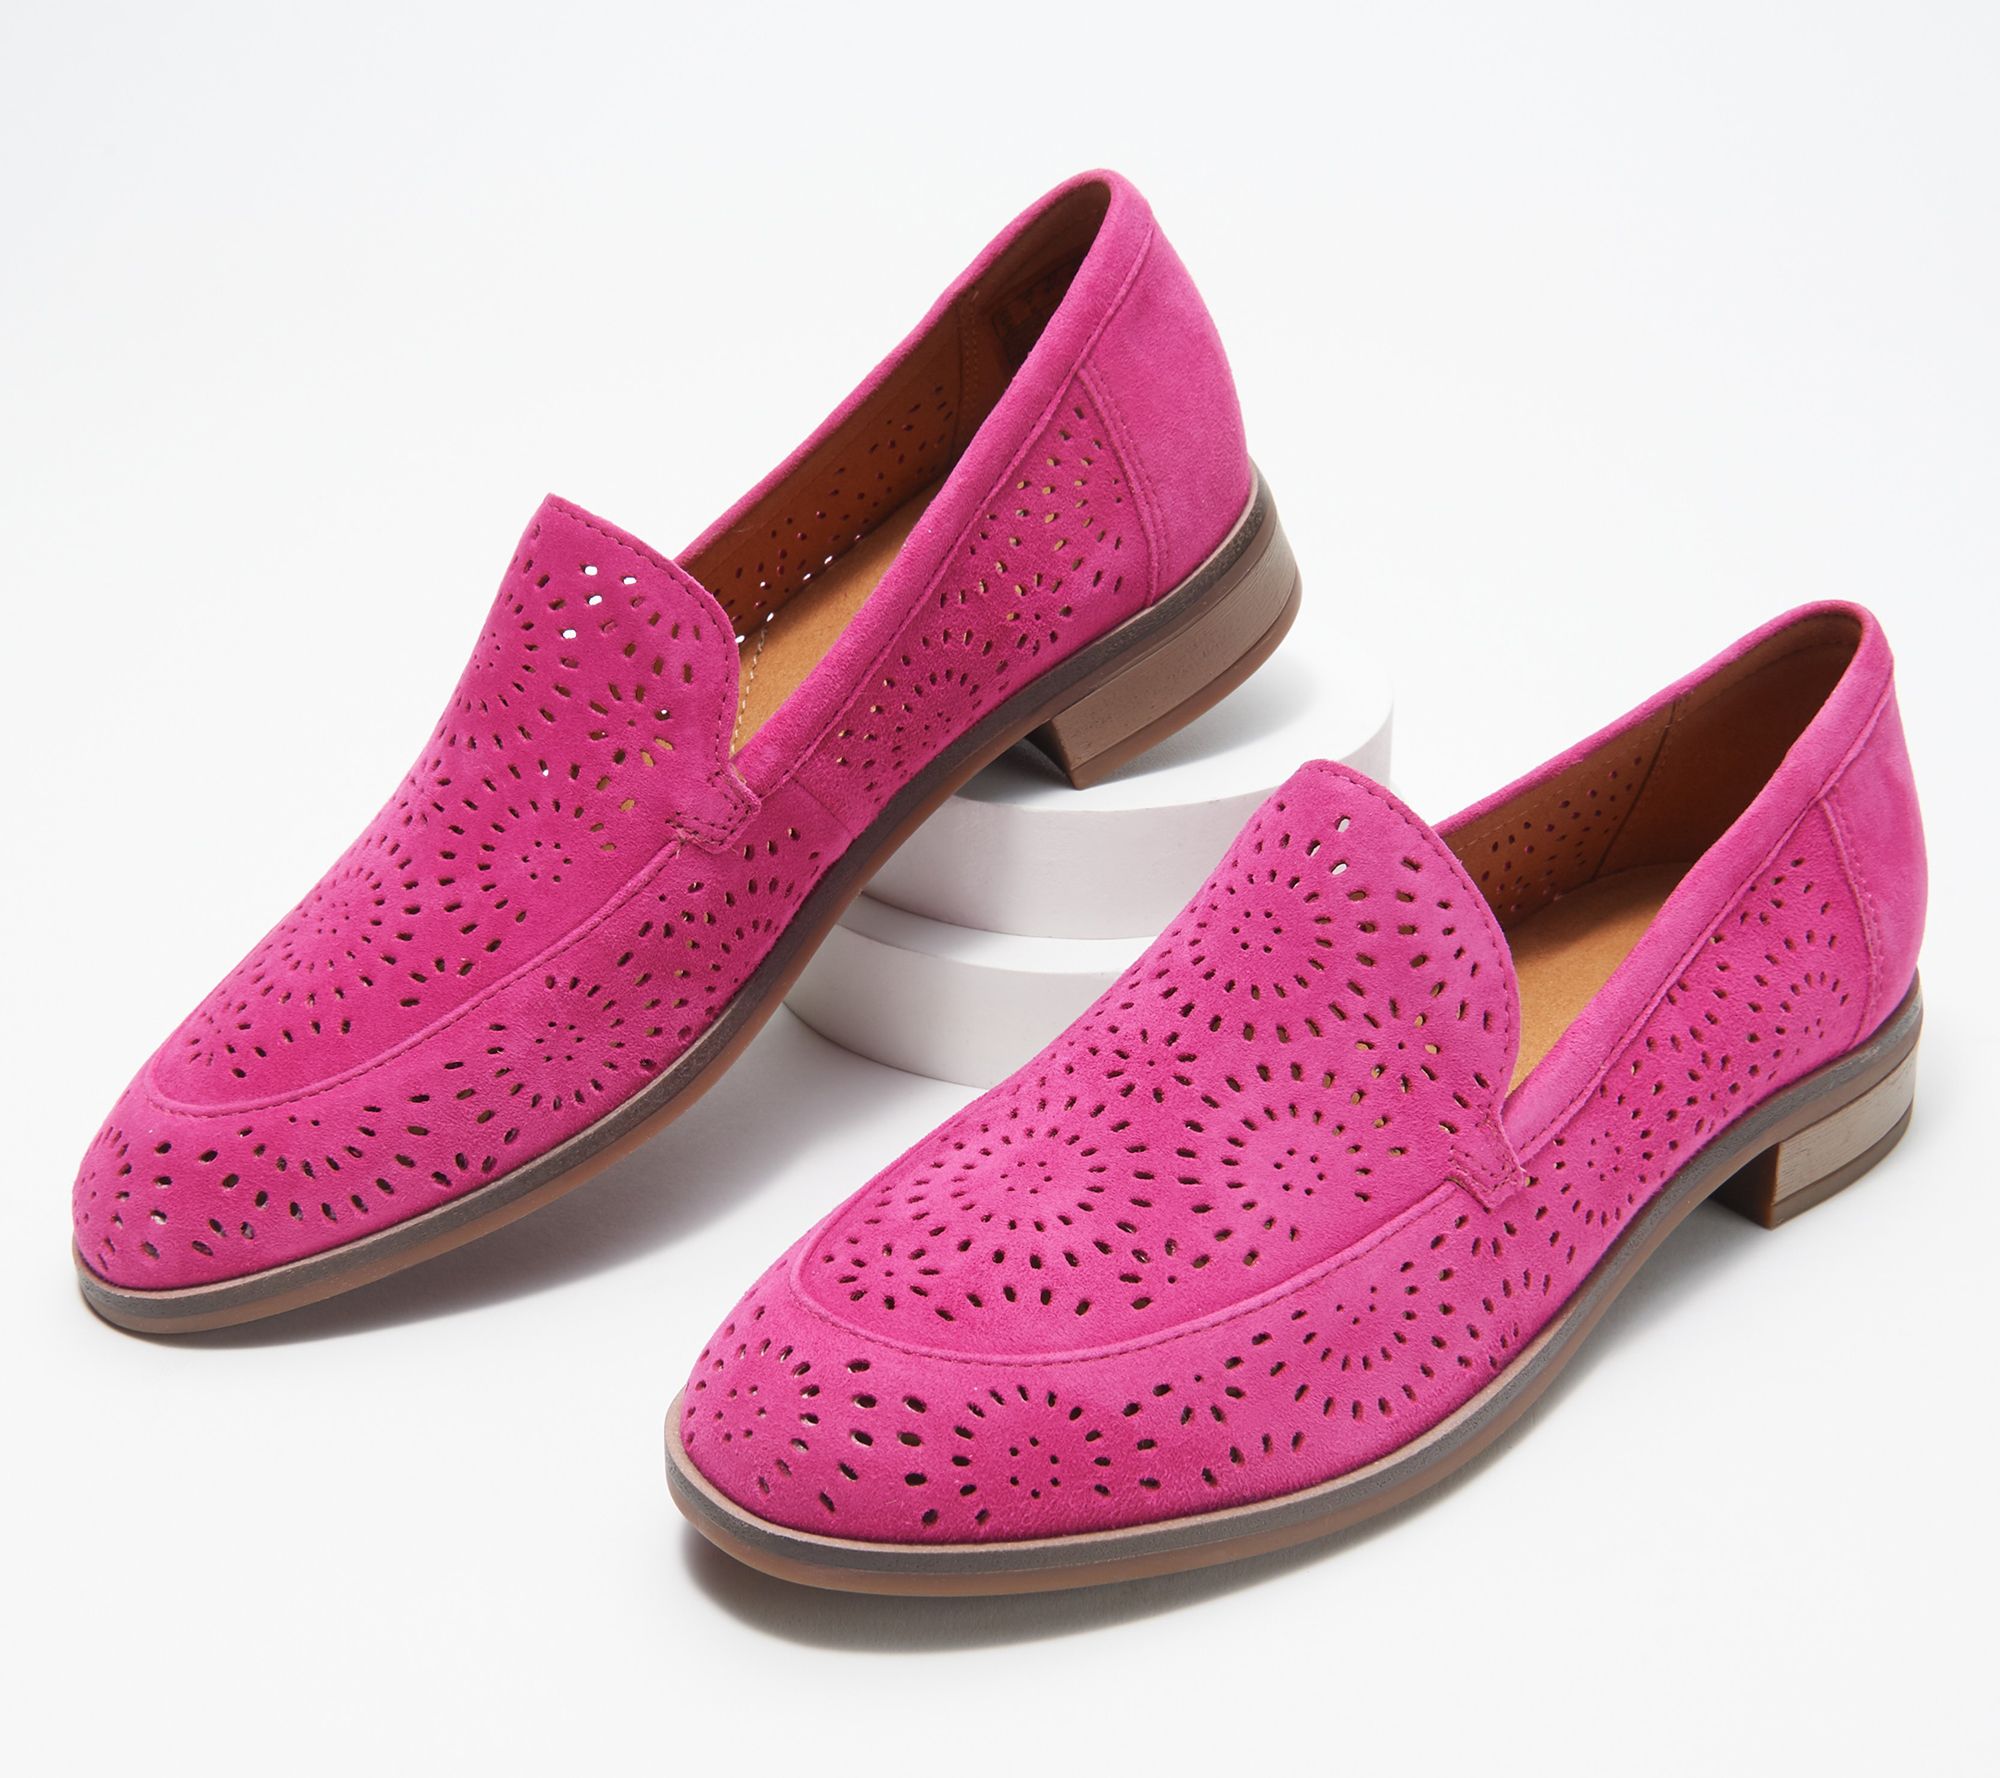 clarks perforated suede slip on sneakers